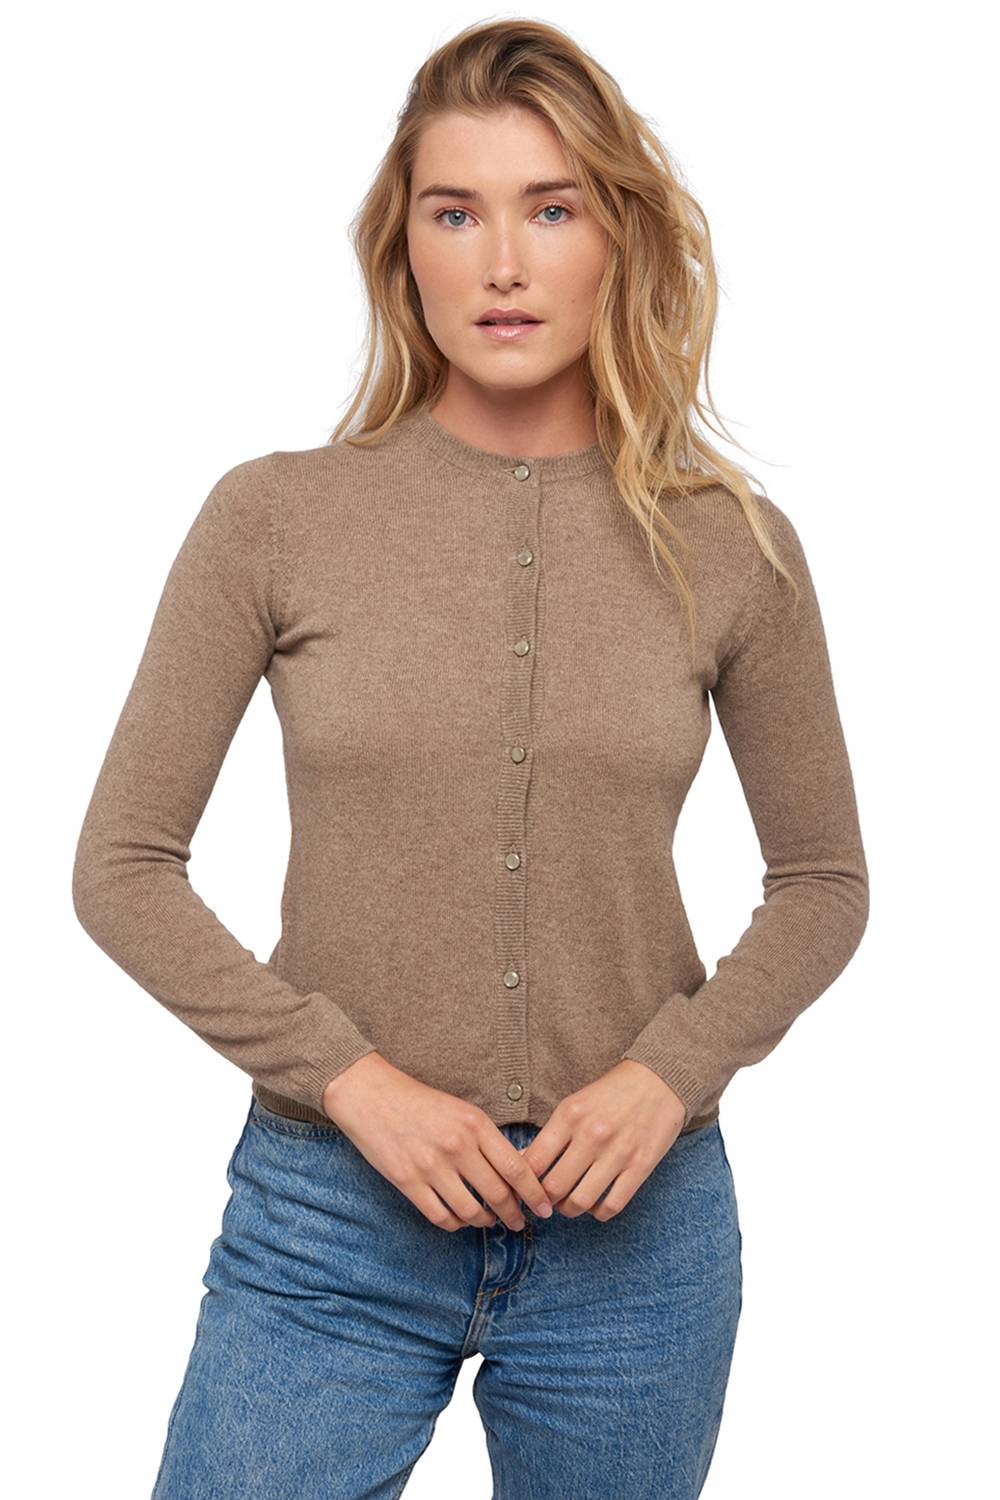 Cachemire pull femme chloe natural brown xl